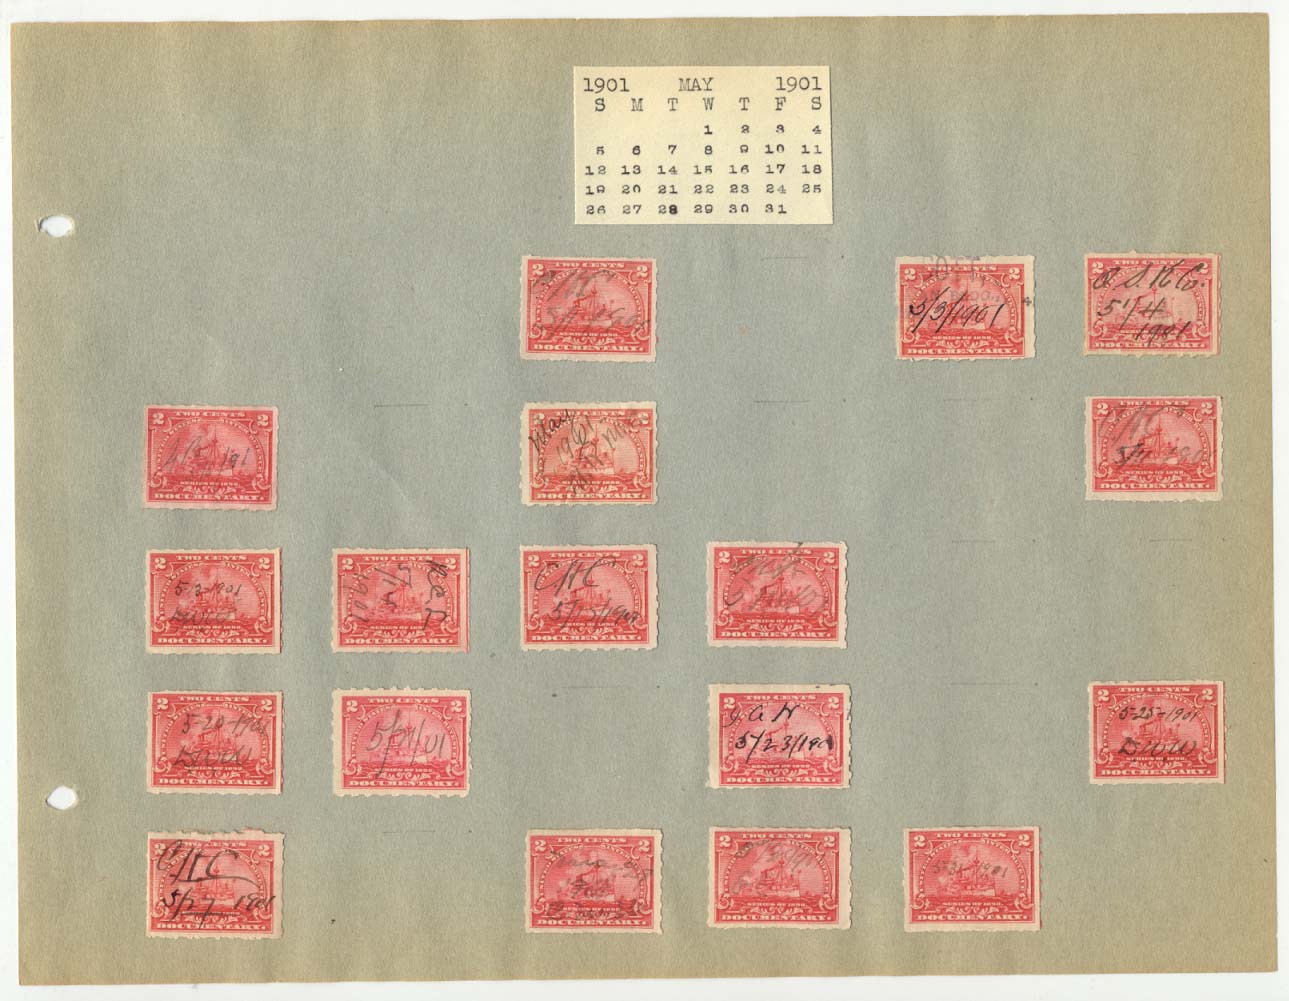 Revenue Stamp Collection May 1901